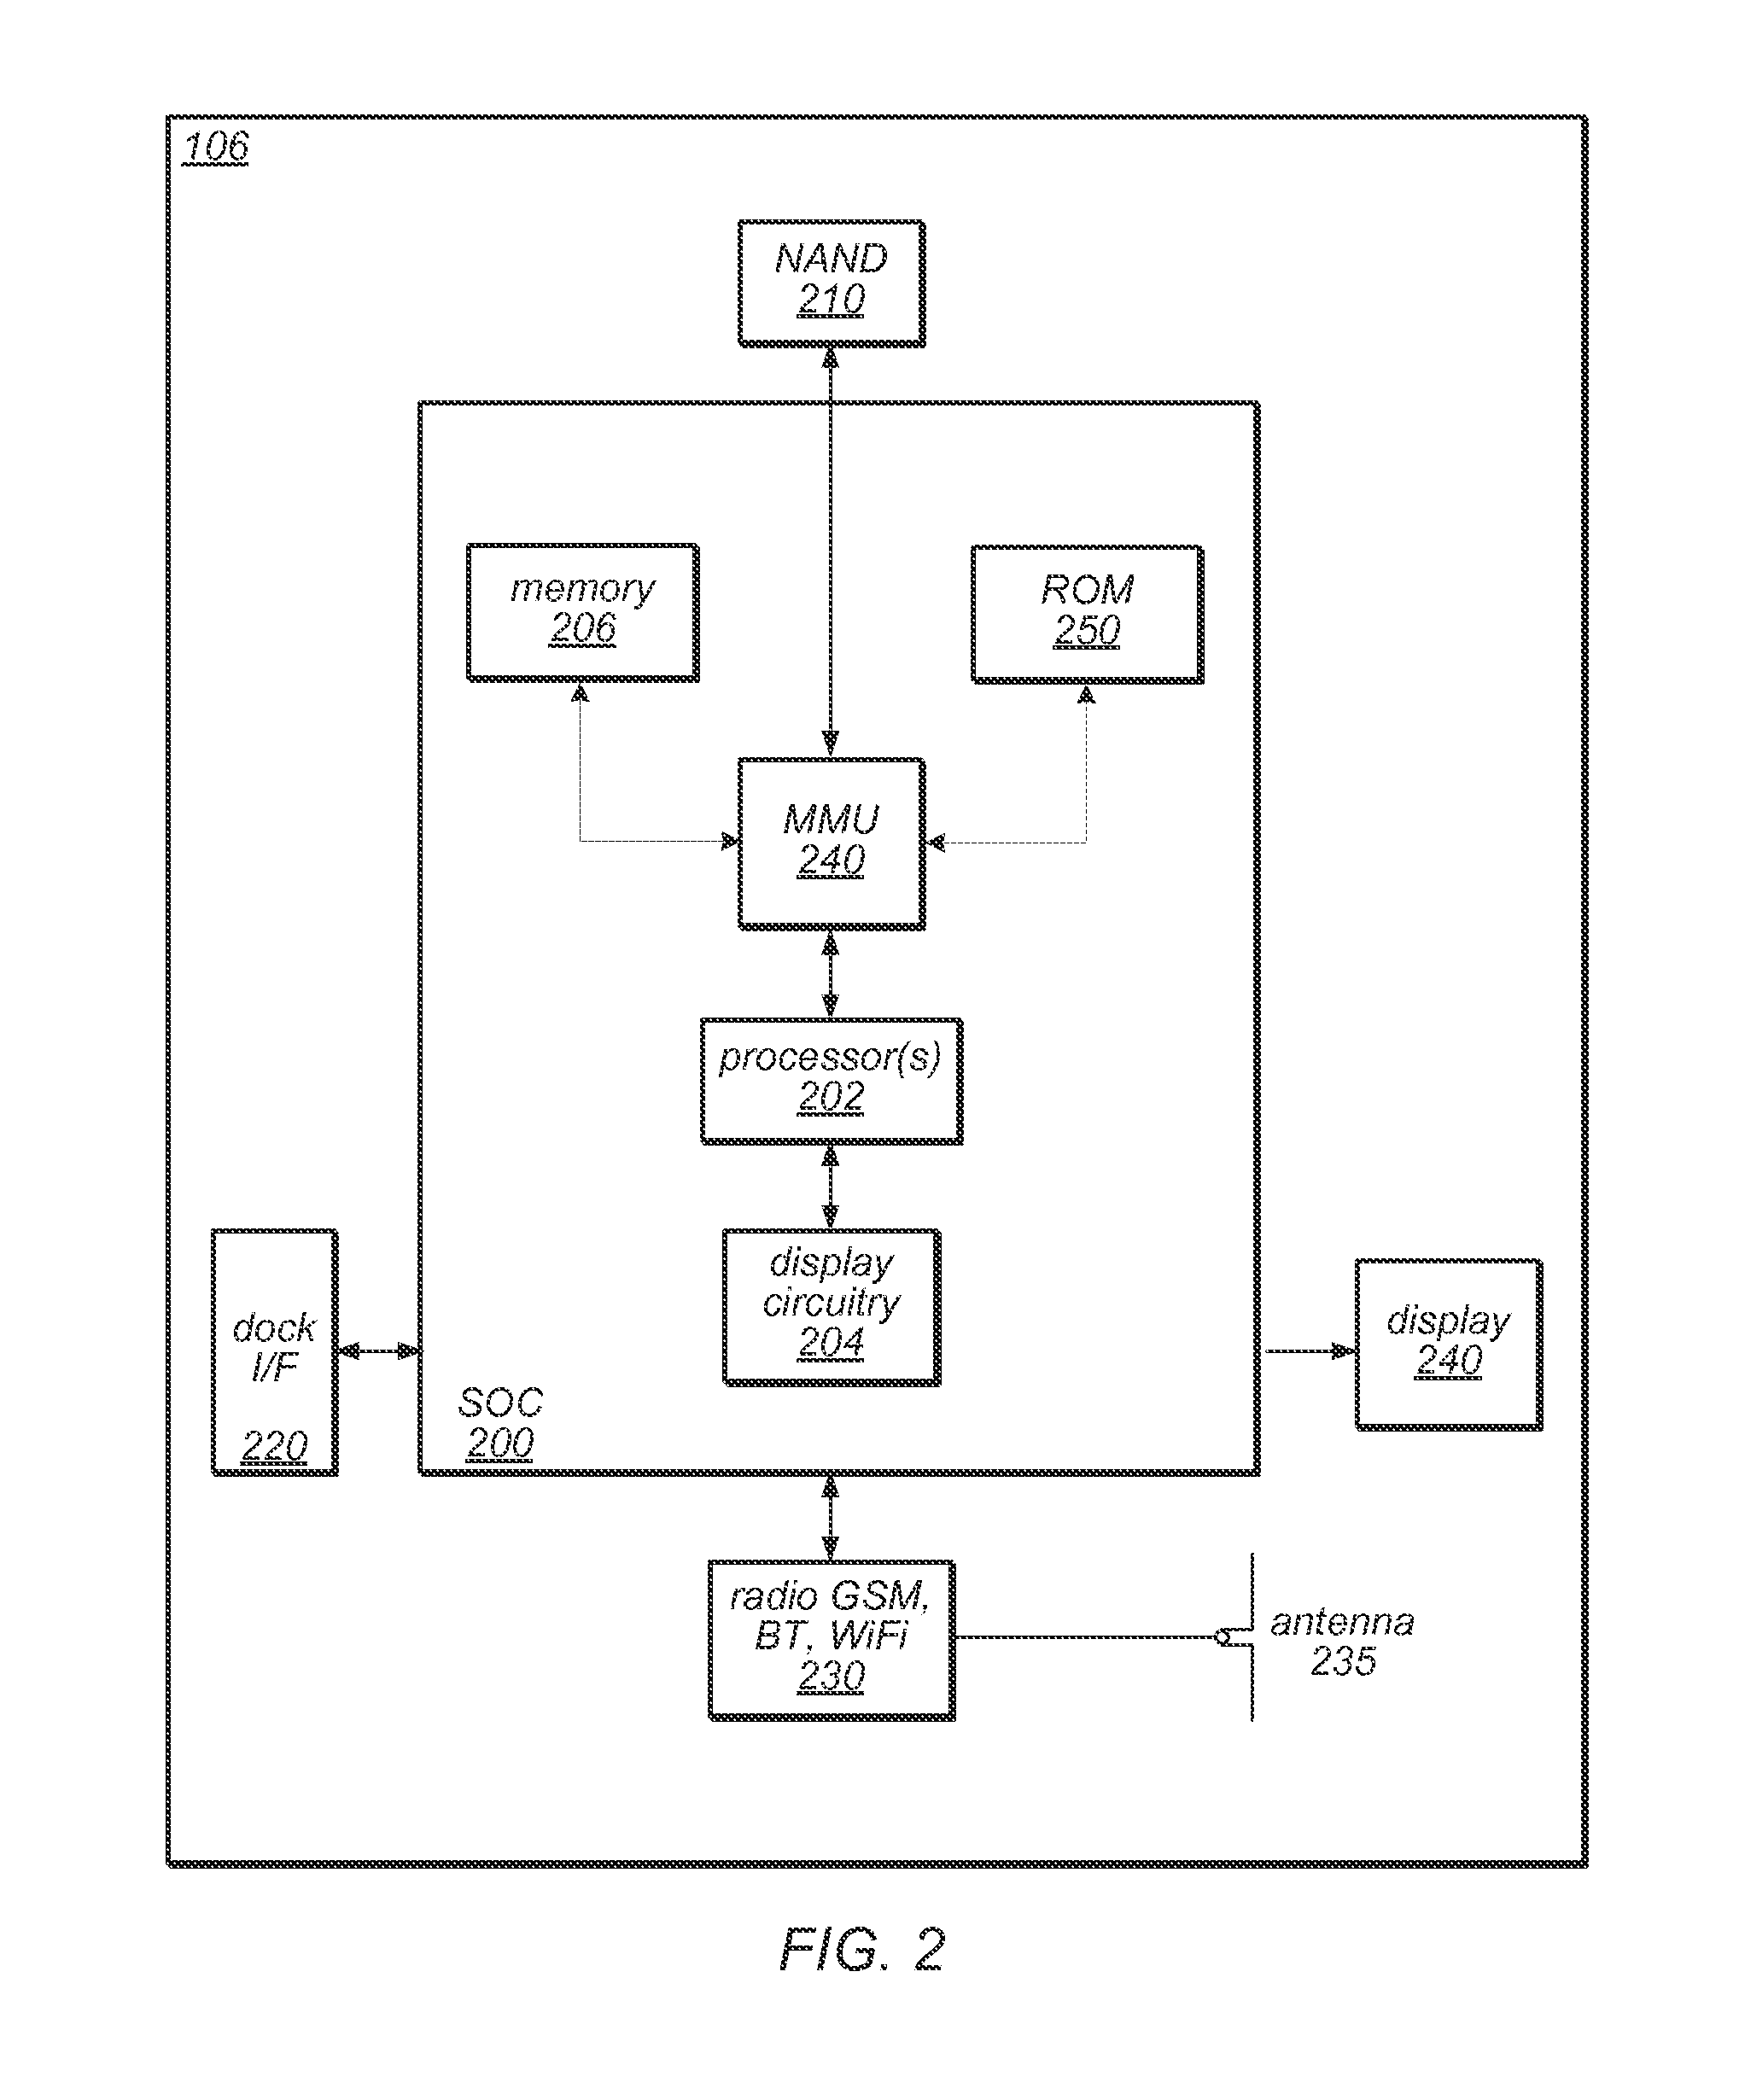 Adaptive channel state feedback in discontinuous reception scenarios based on connection characteristics